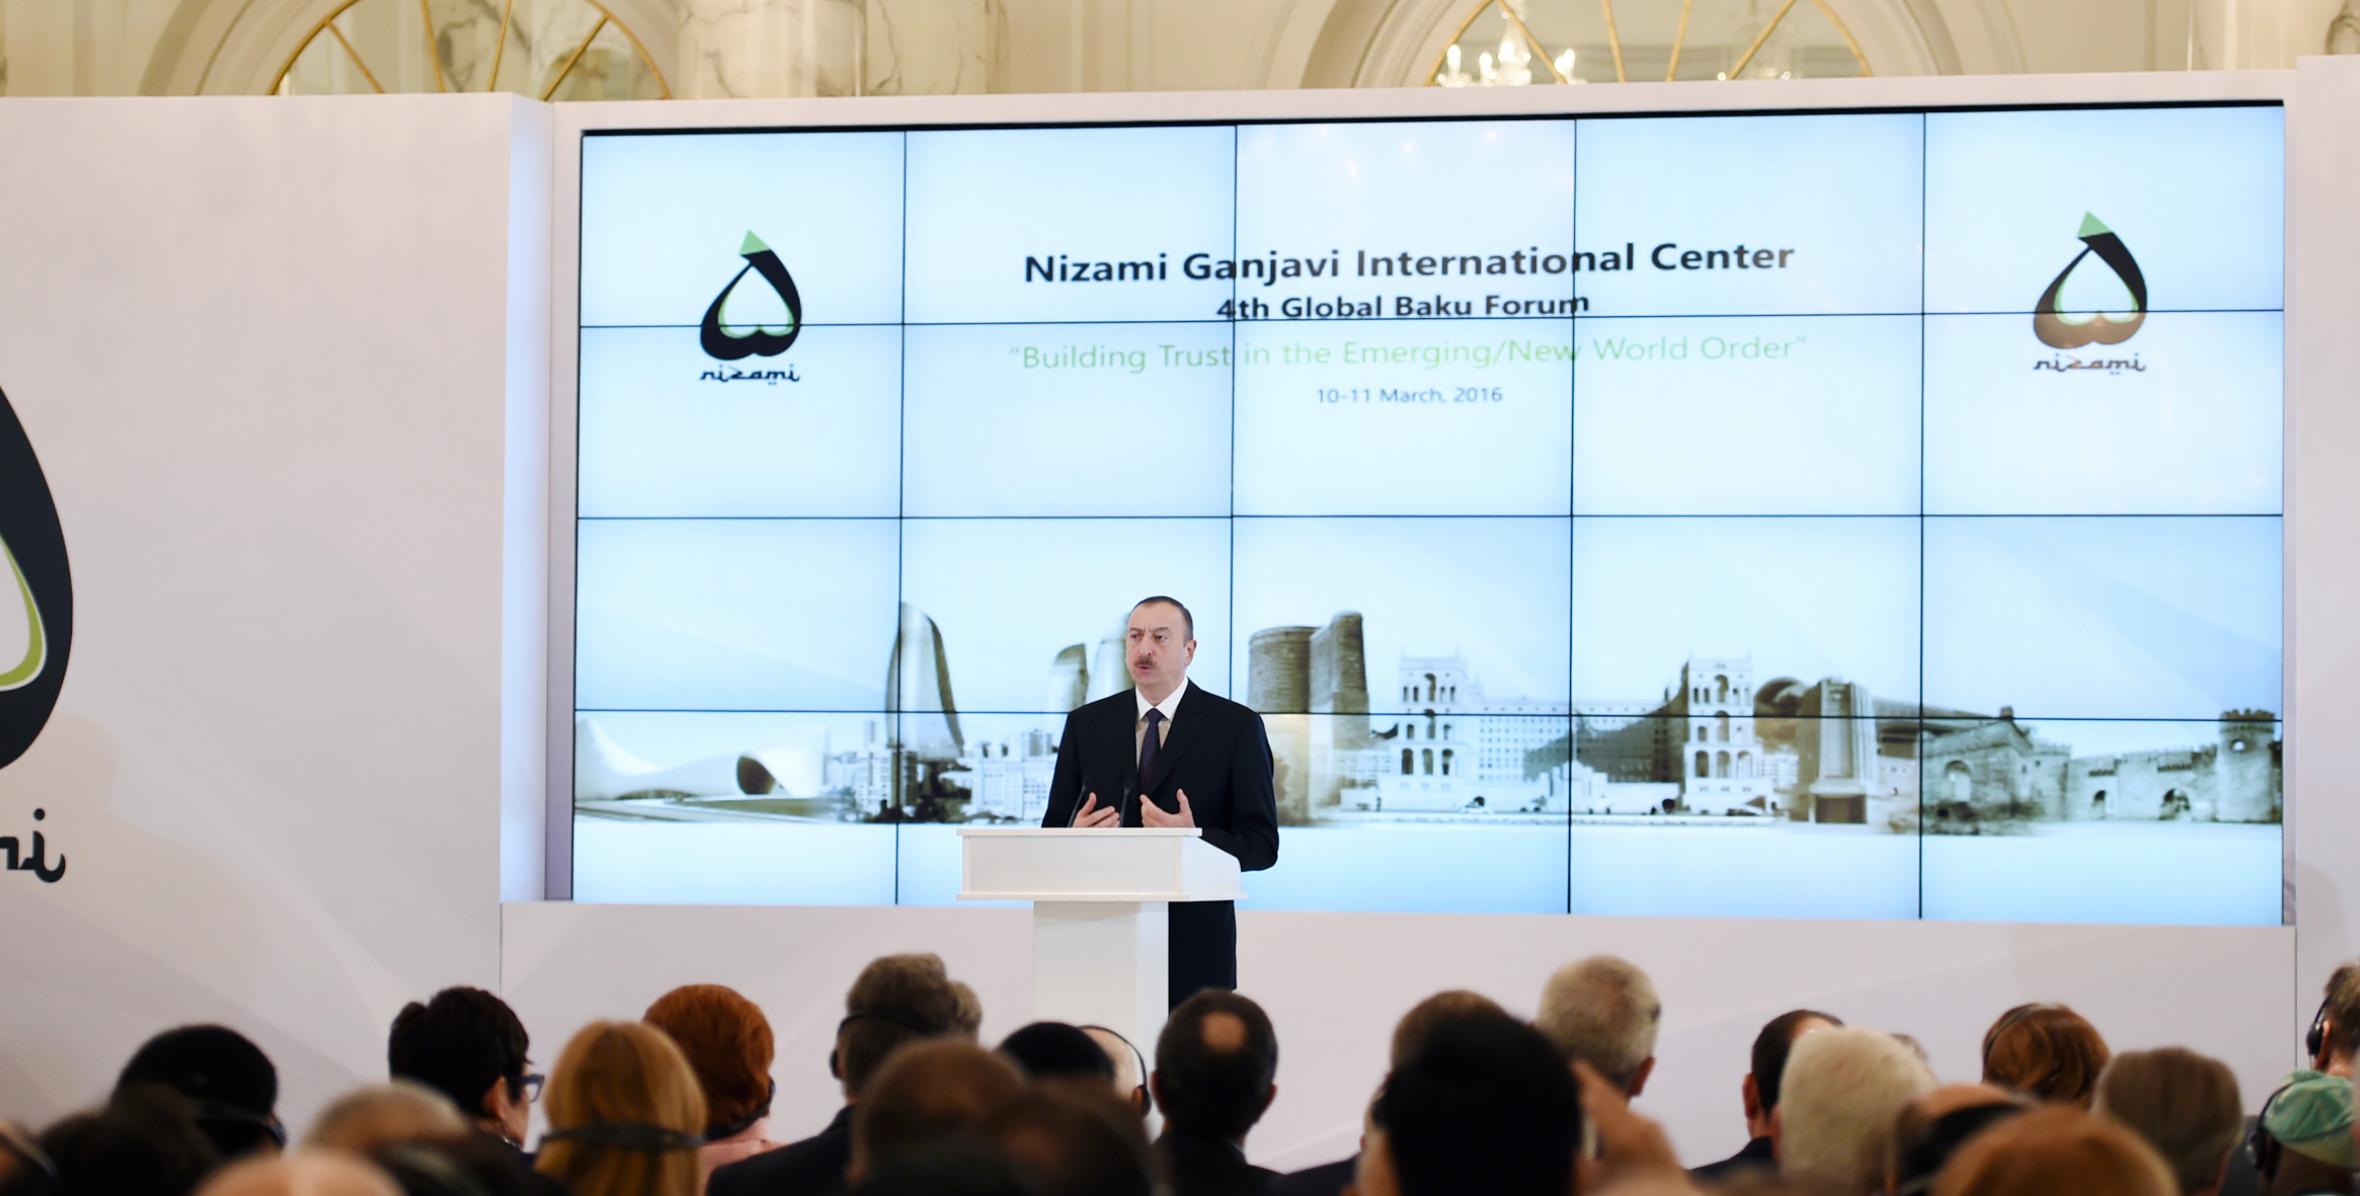 Ilham Aliyev attended the opening of the 4th Global Baku Forum